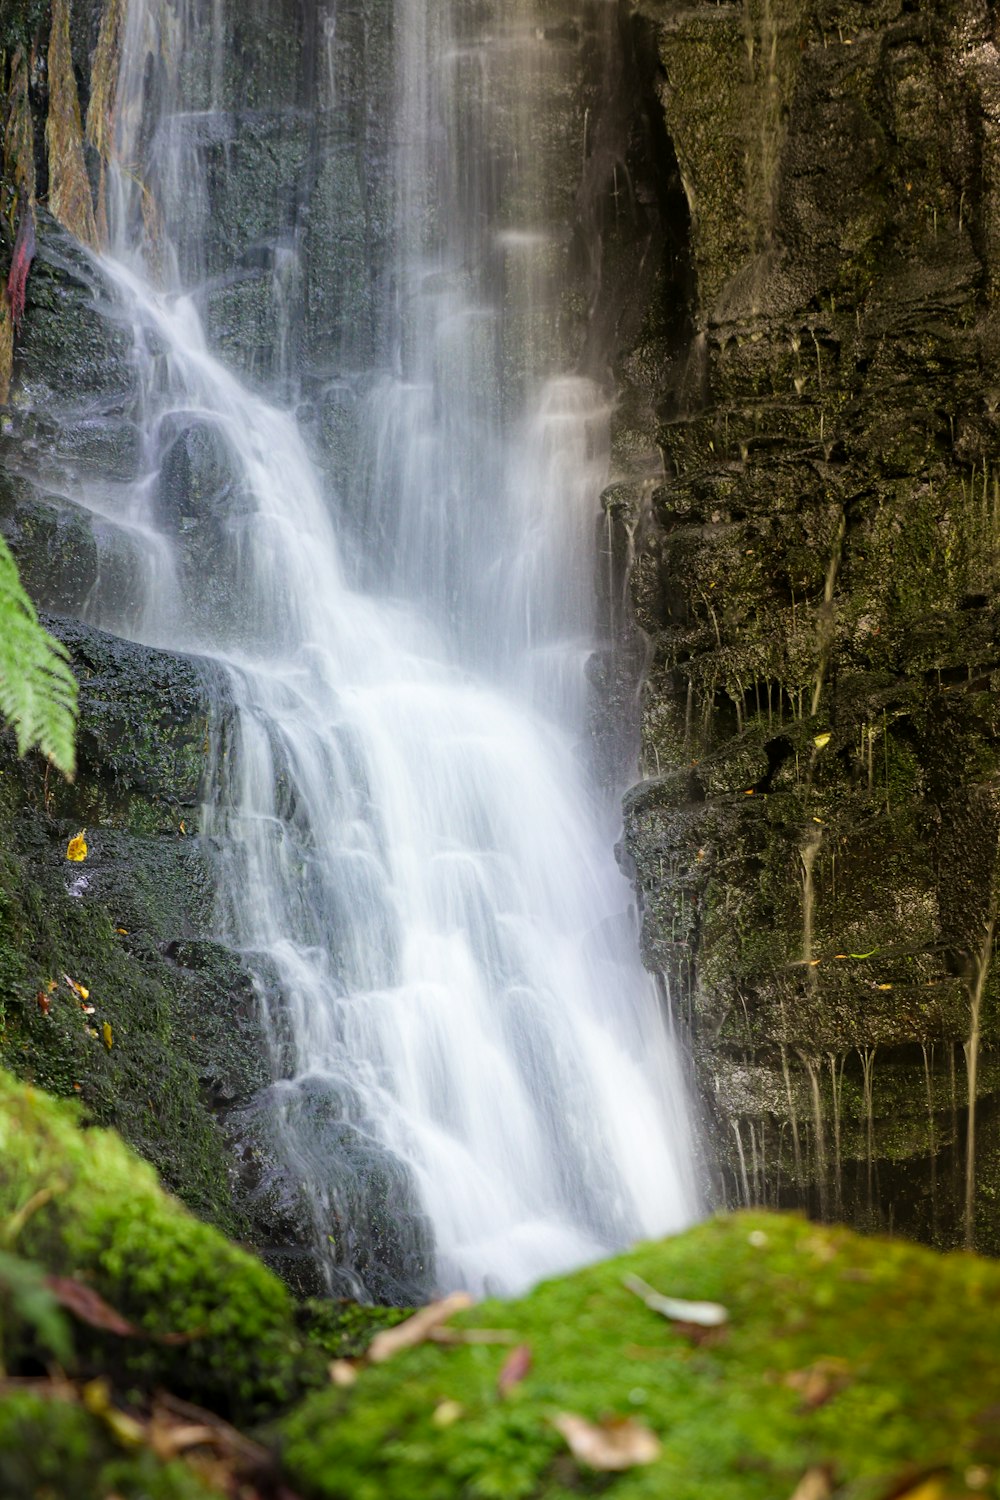 a waterfall with moss growing on the rocks